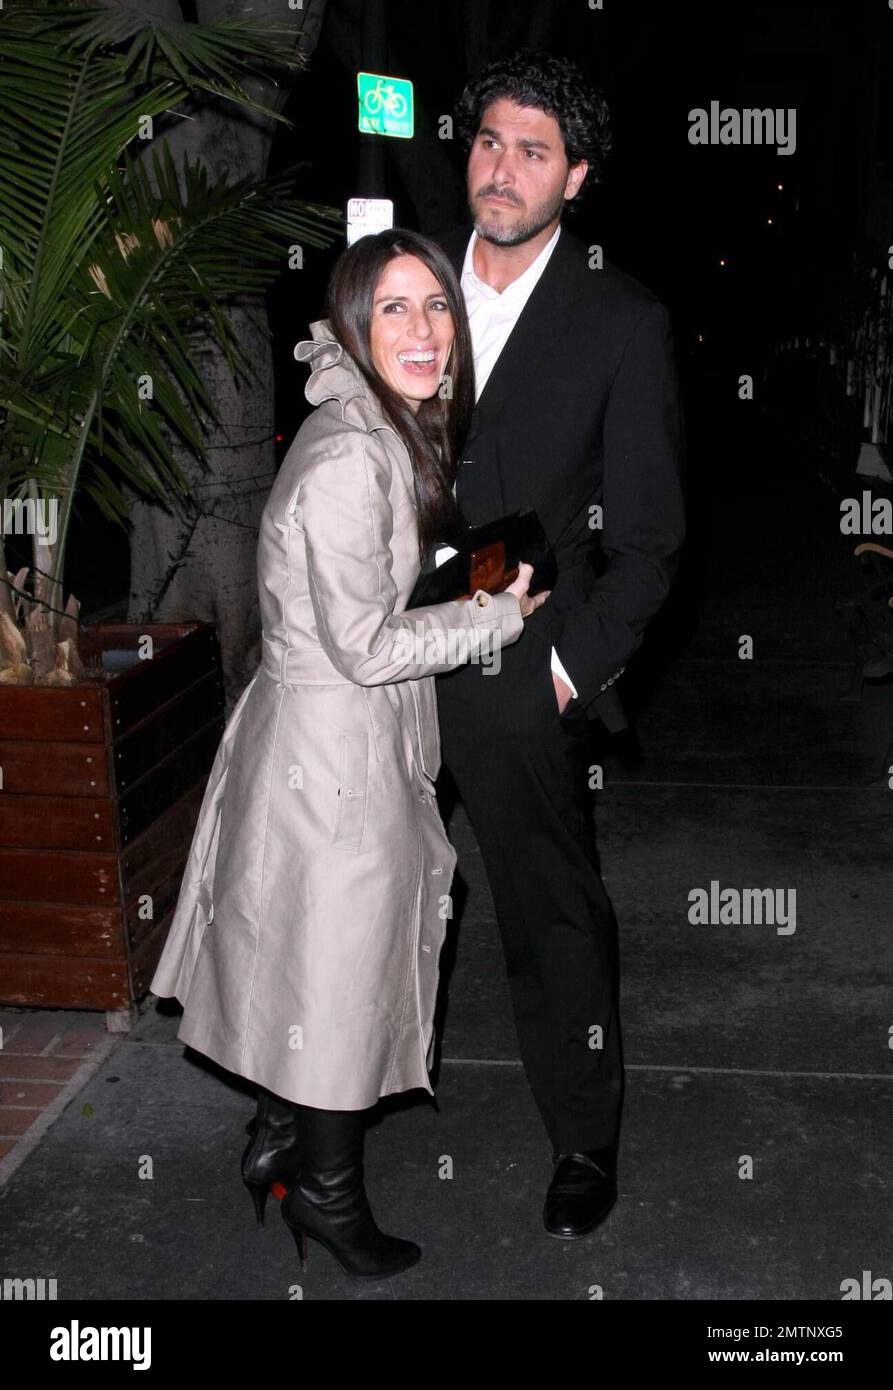 It's raining money on 'Punky Brewster' actress Soleil Moon Frye! The actress and producer Jason Goldberg leave the restaurant Madeos as a photographer tosses a hand full of dollar bills over Soleil's head as he asks her opinion on the state of the U.S. economy. Los Angeles, CA. 2/7/09. Stock Photo